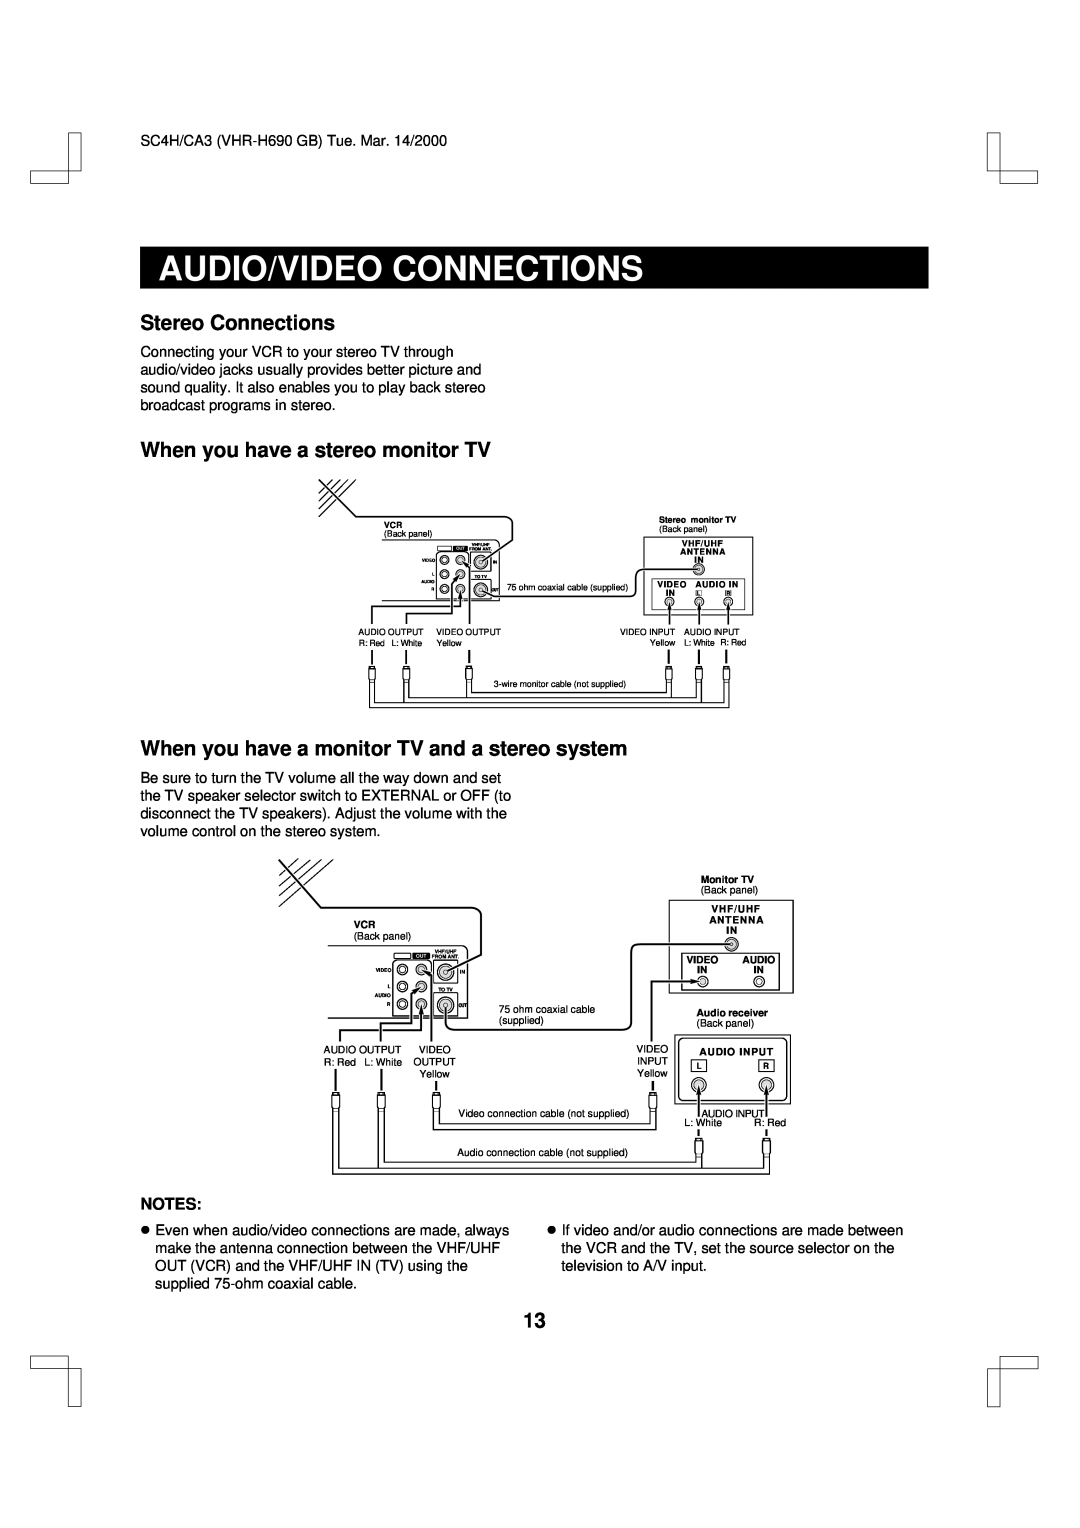 Sanyo VHR-H690 instruction manual Audio/Video Connections, Stereo Connections, When you have a stereo monitor TV 